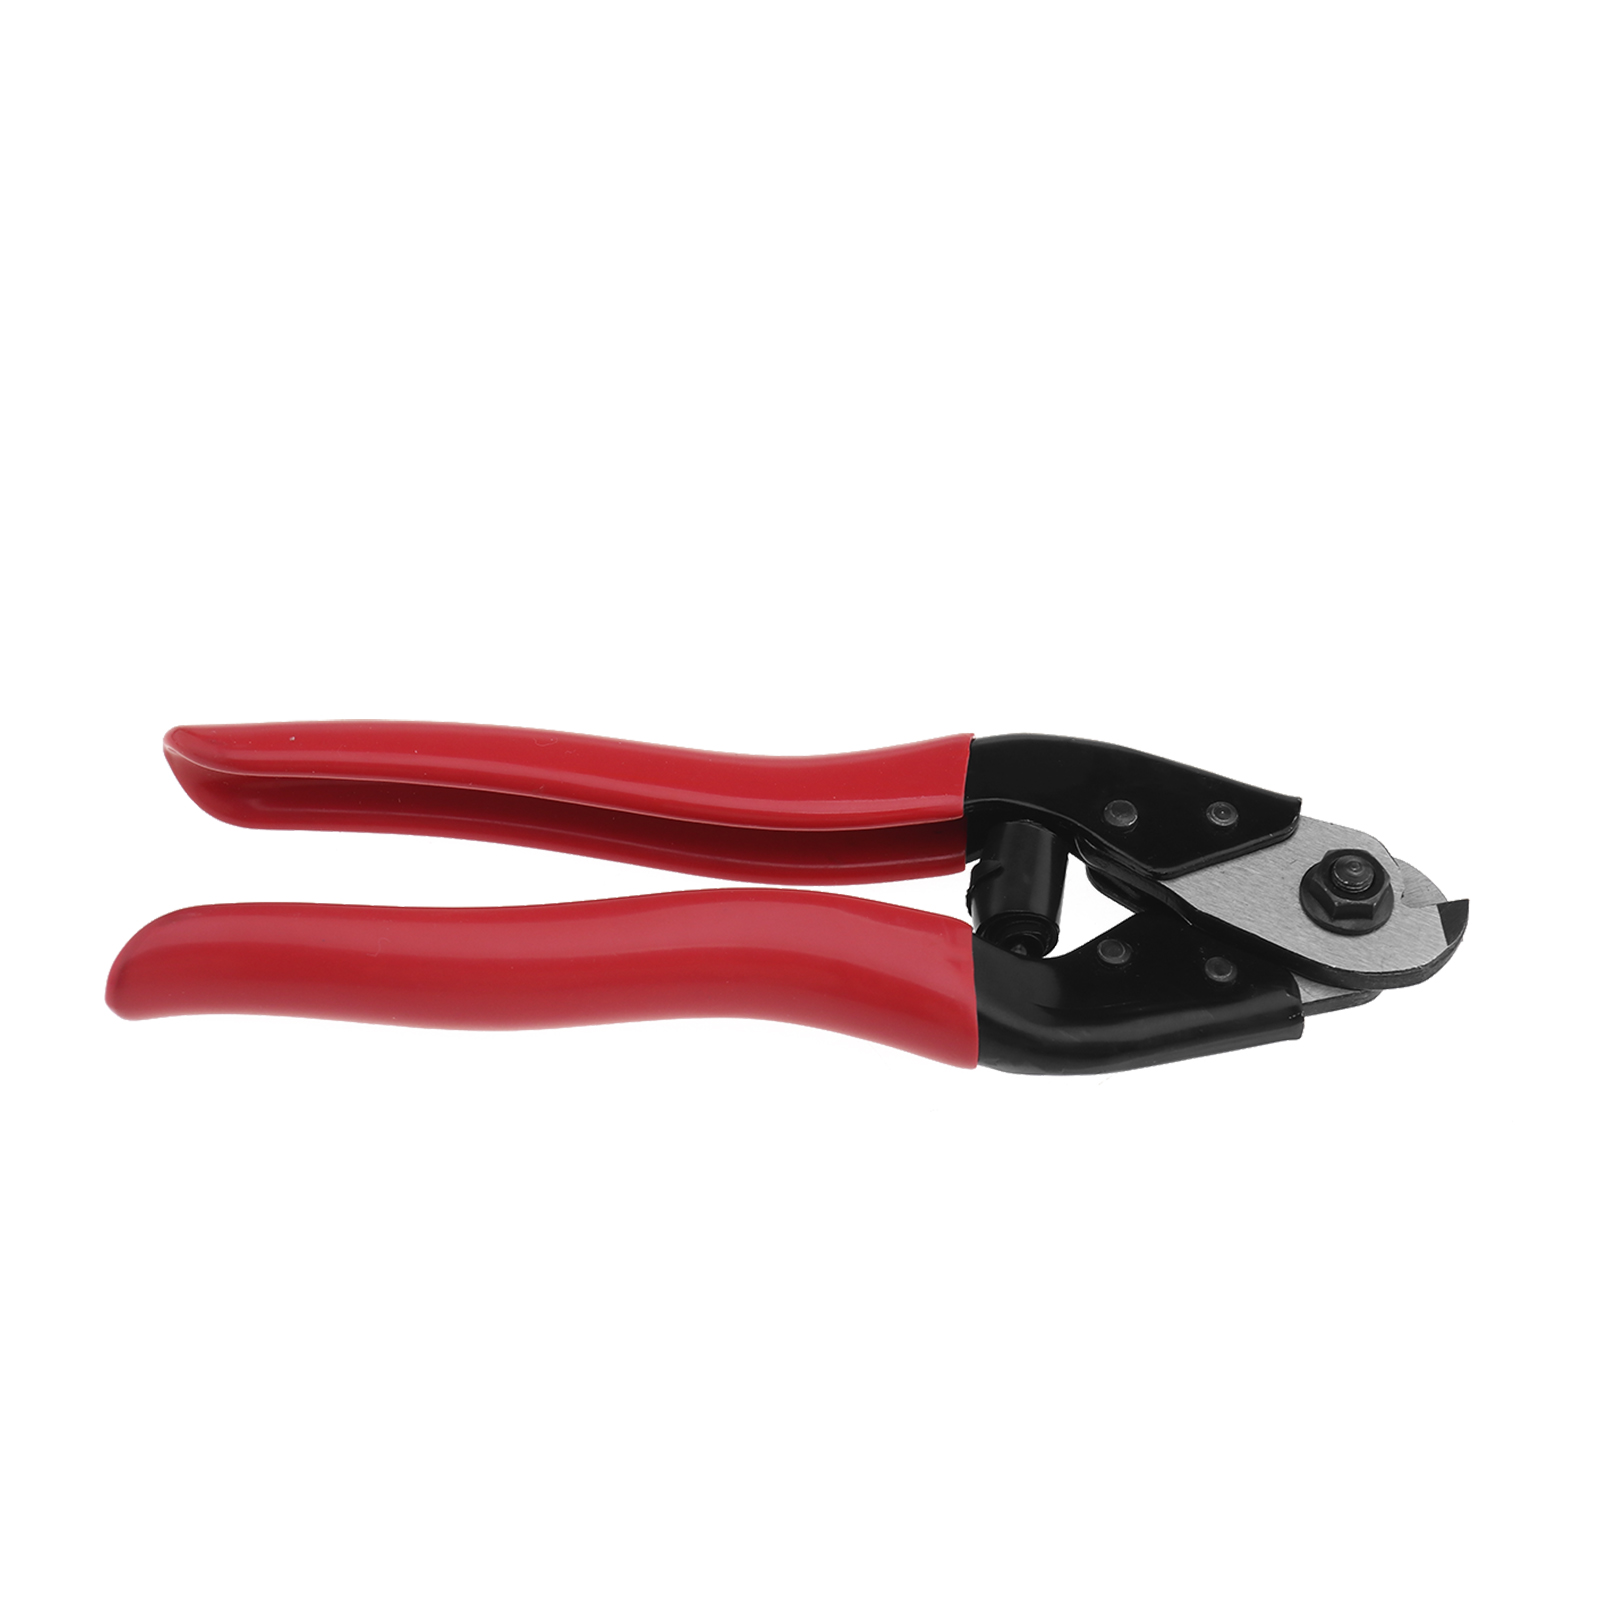 Spring Steel Wire Rope Cutters Snips Cutting Pliers Tool Quality Professional